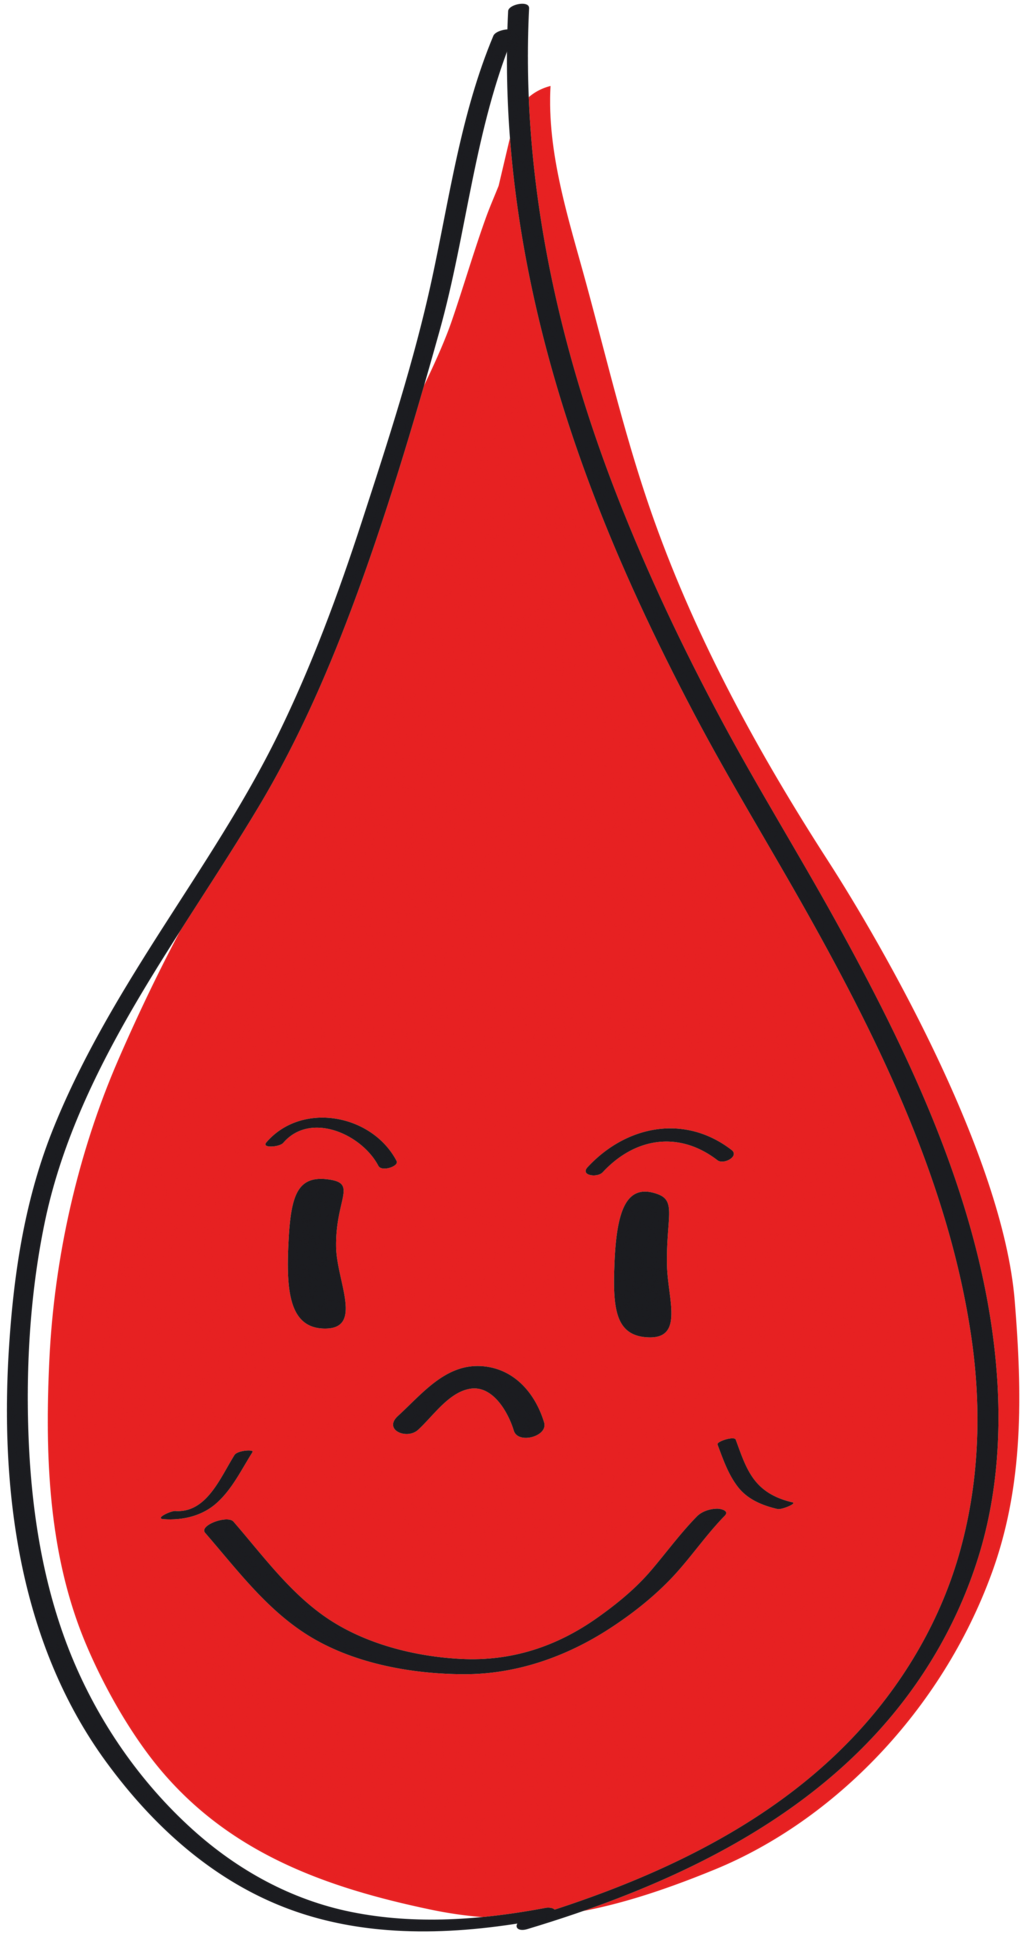 Drop of blood clipart